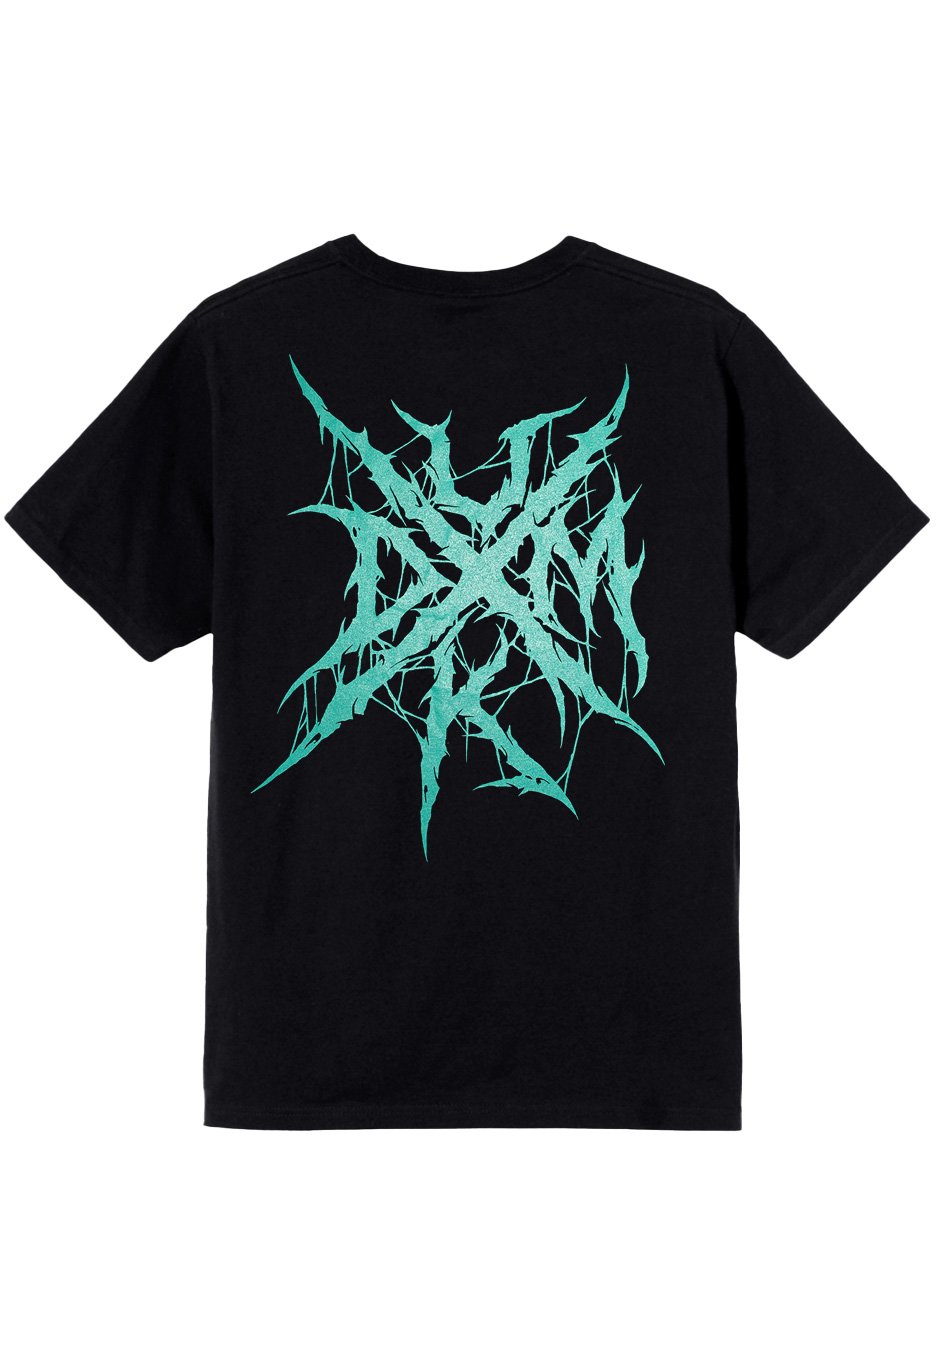 Ingested - Teeth Coffin - T-Shirt